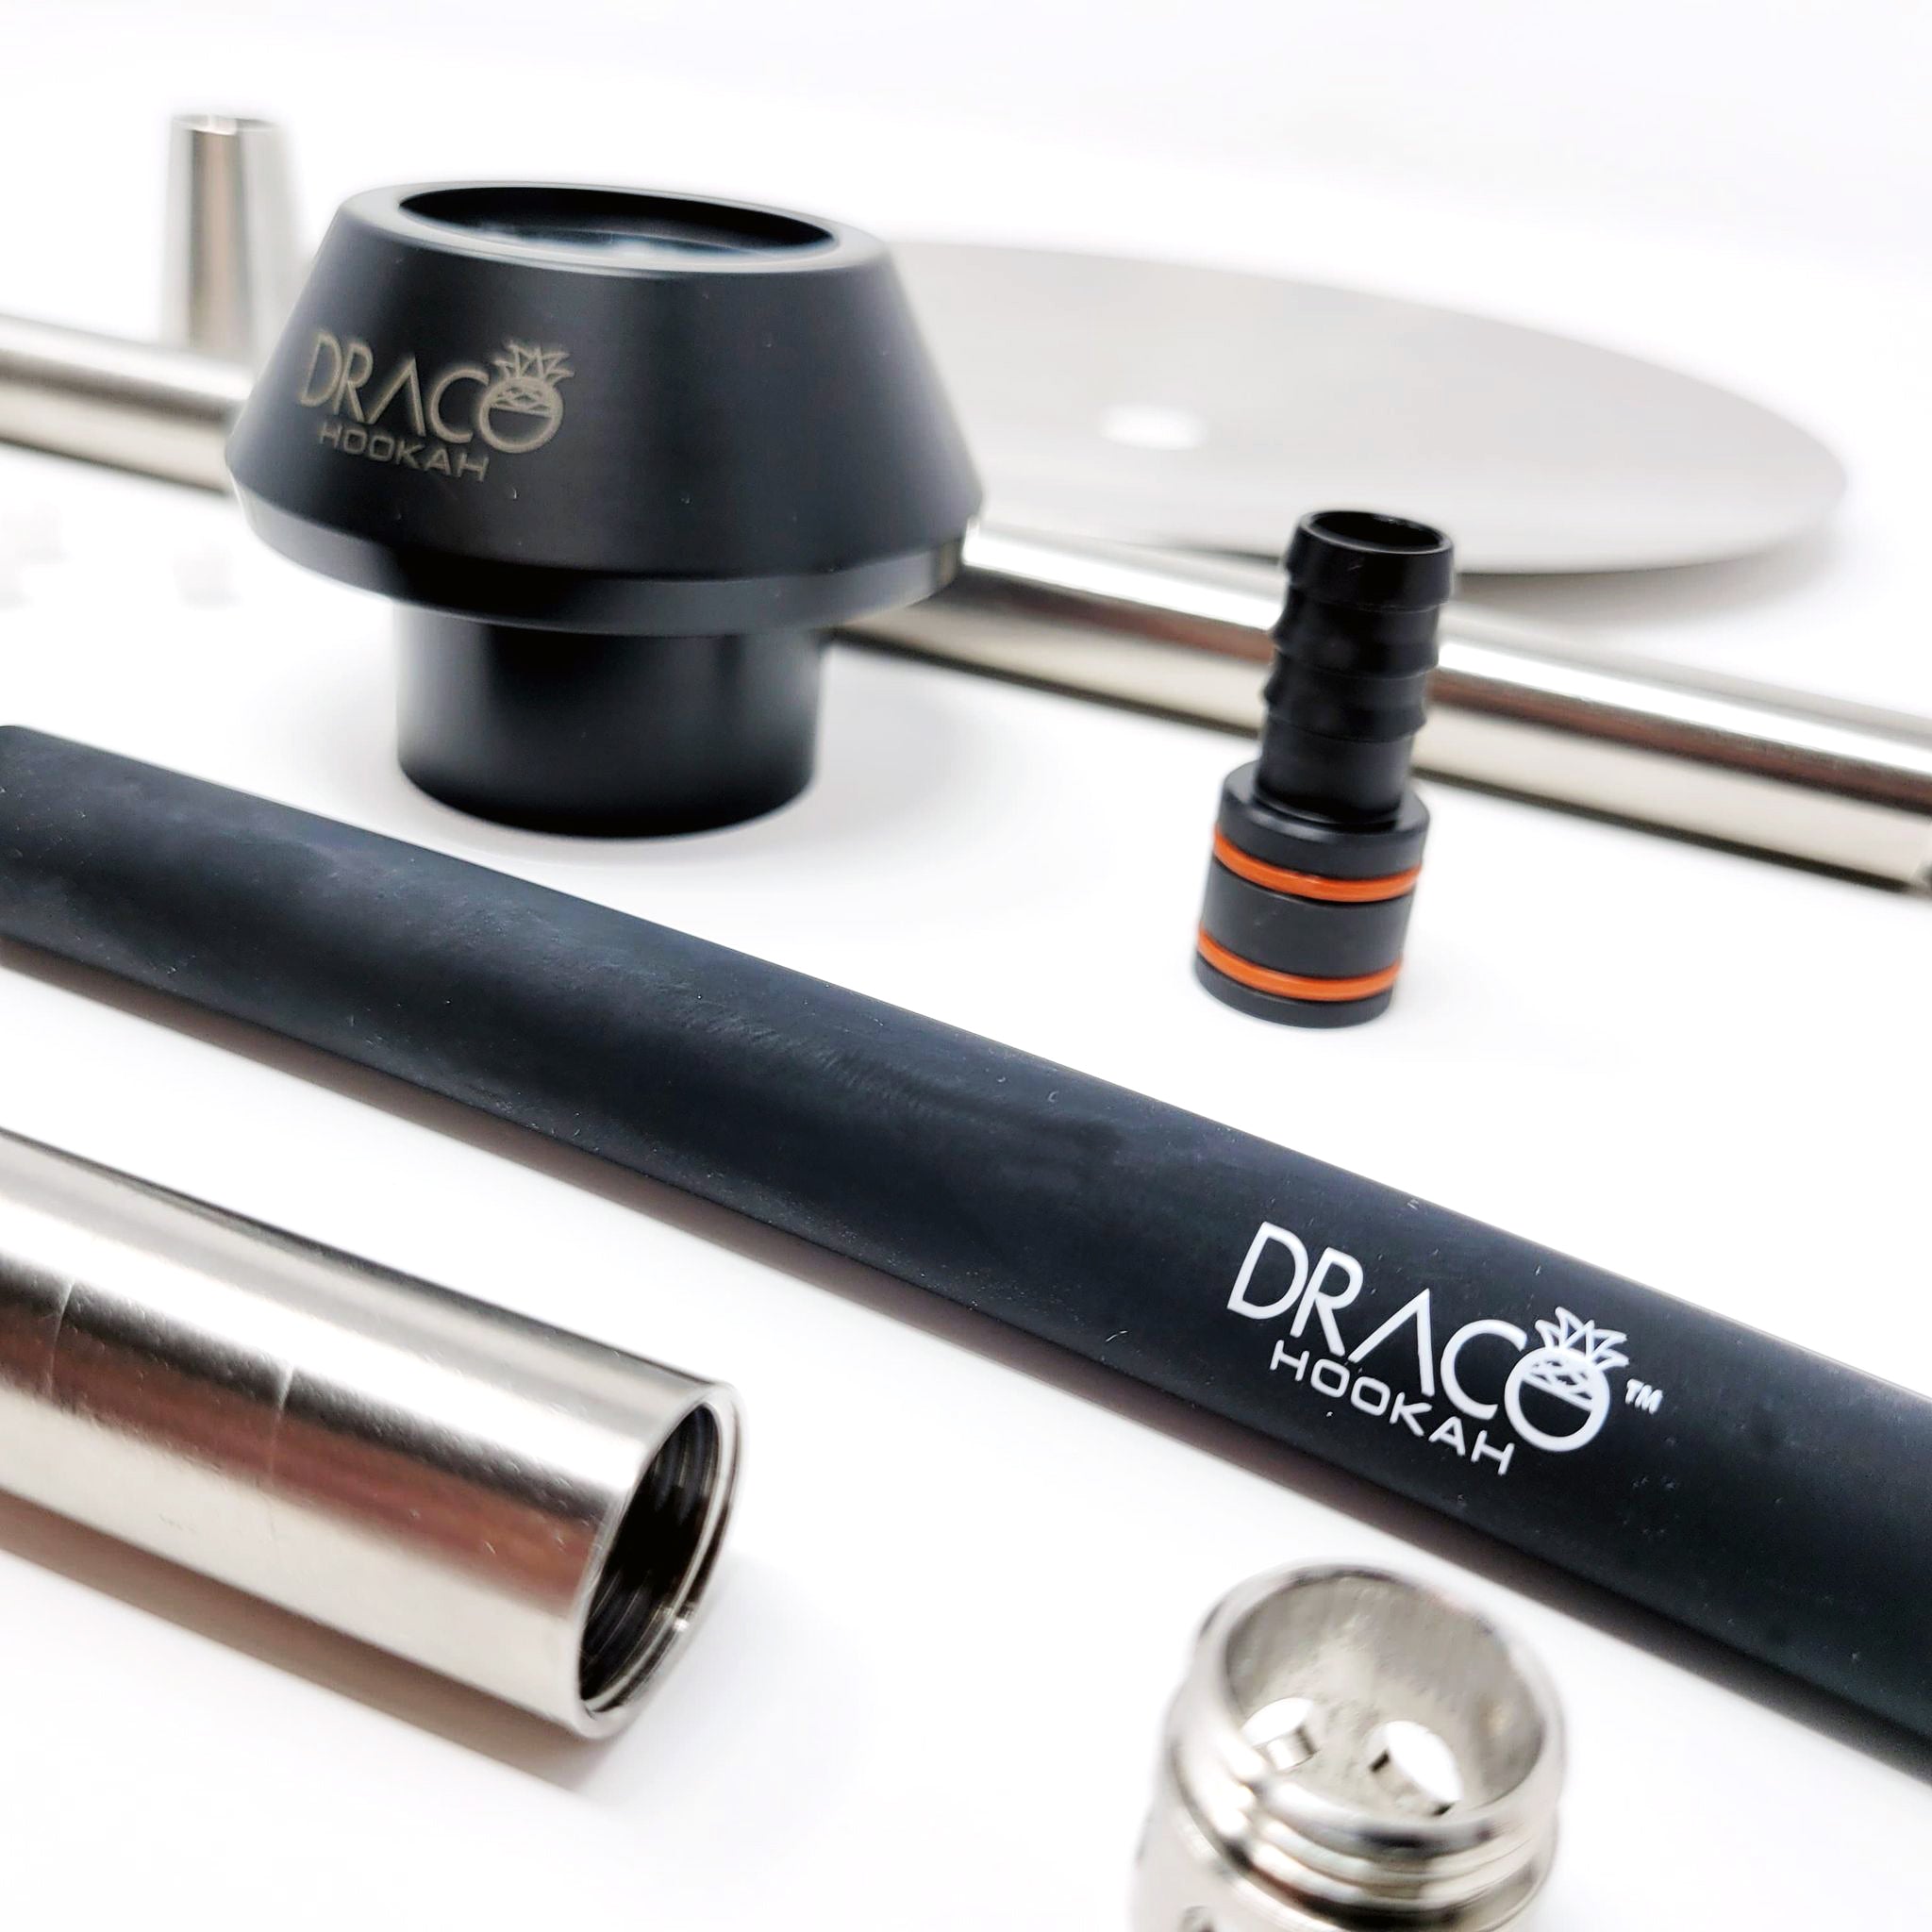 Draco Hookah Purgo - Stainless Steel Hookah with Diffuser, Tray, and Soft Touch Silicone Hose